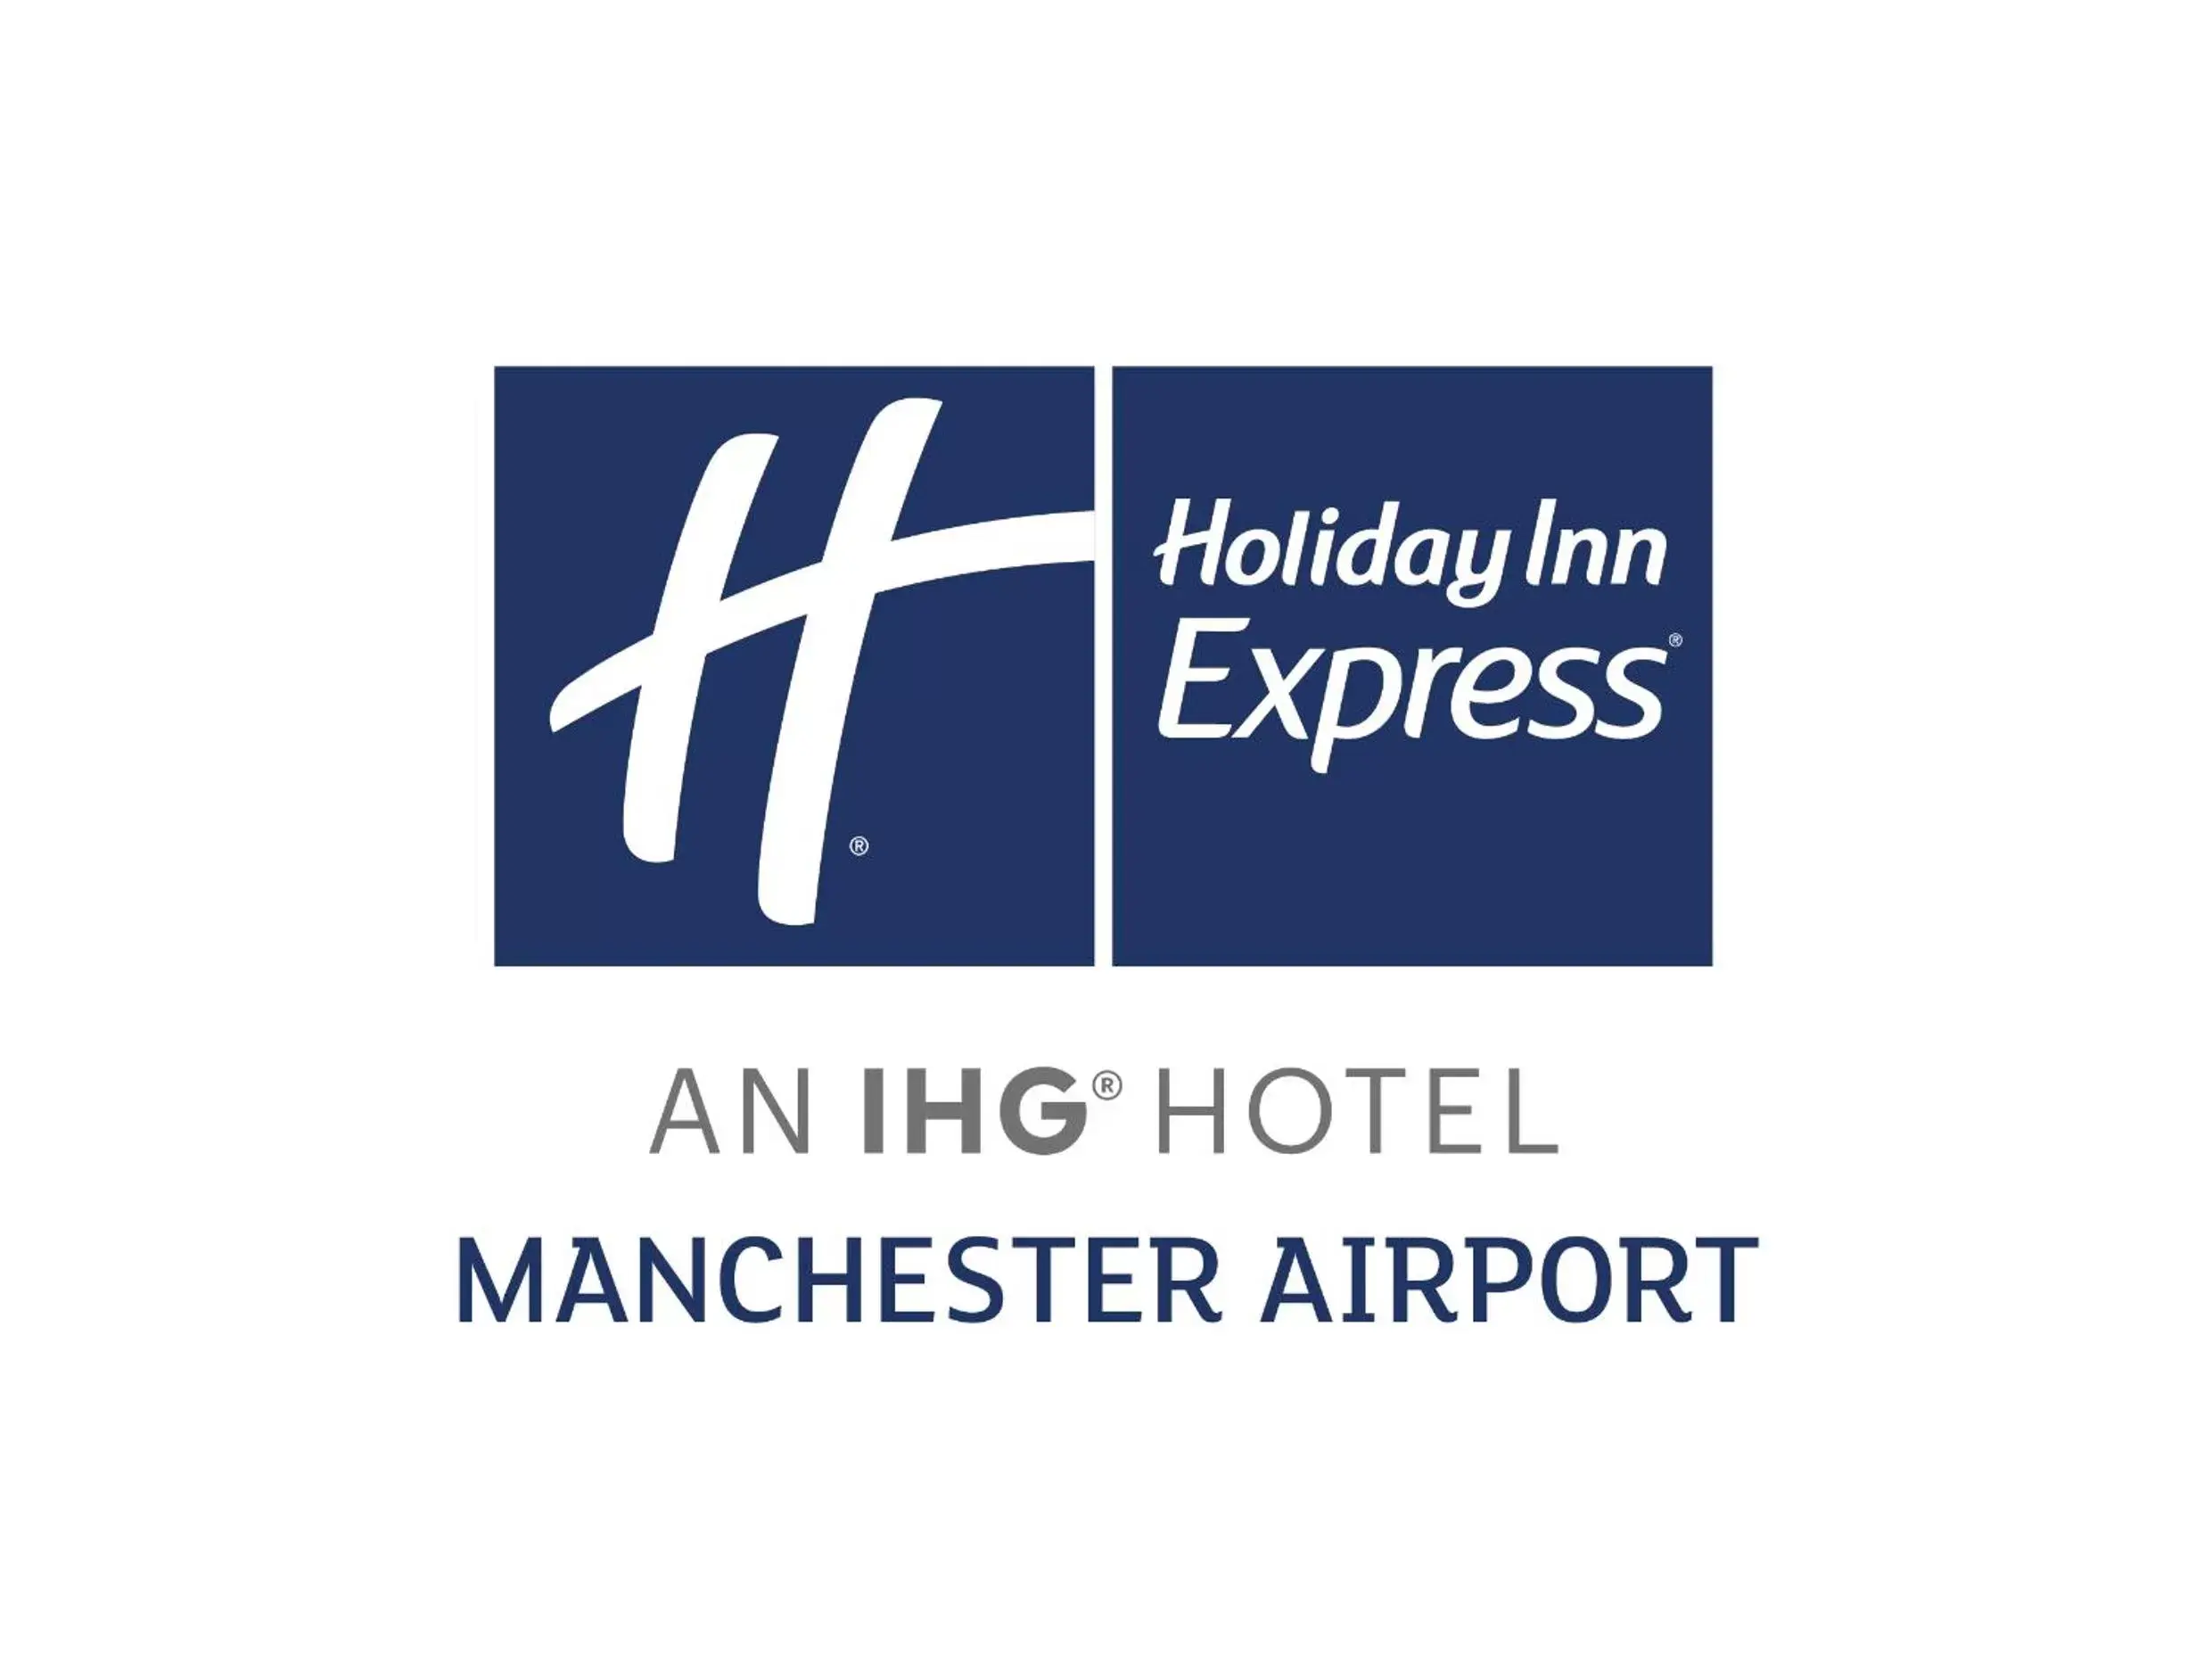 Logo/Certificate/Sign in Holiday Inn Express Manchester Airport, an IHG Hotel